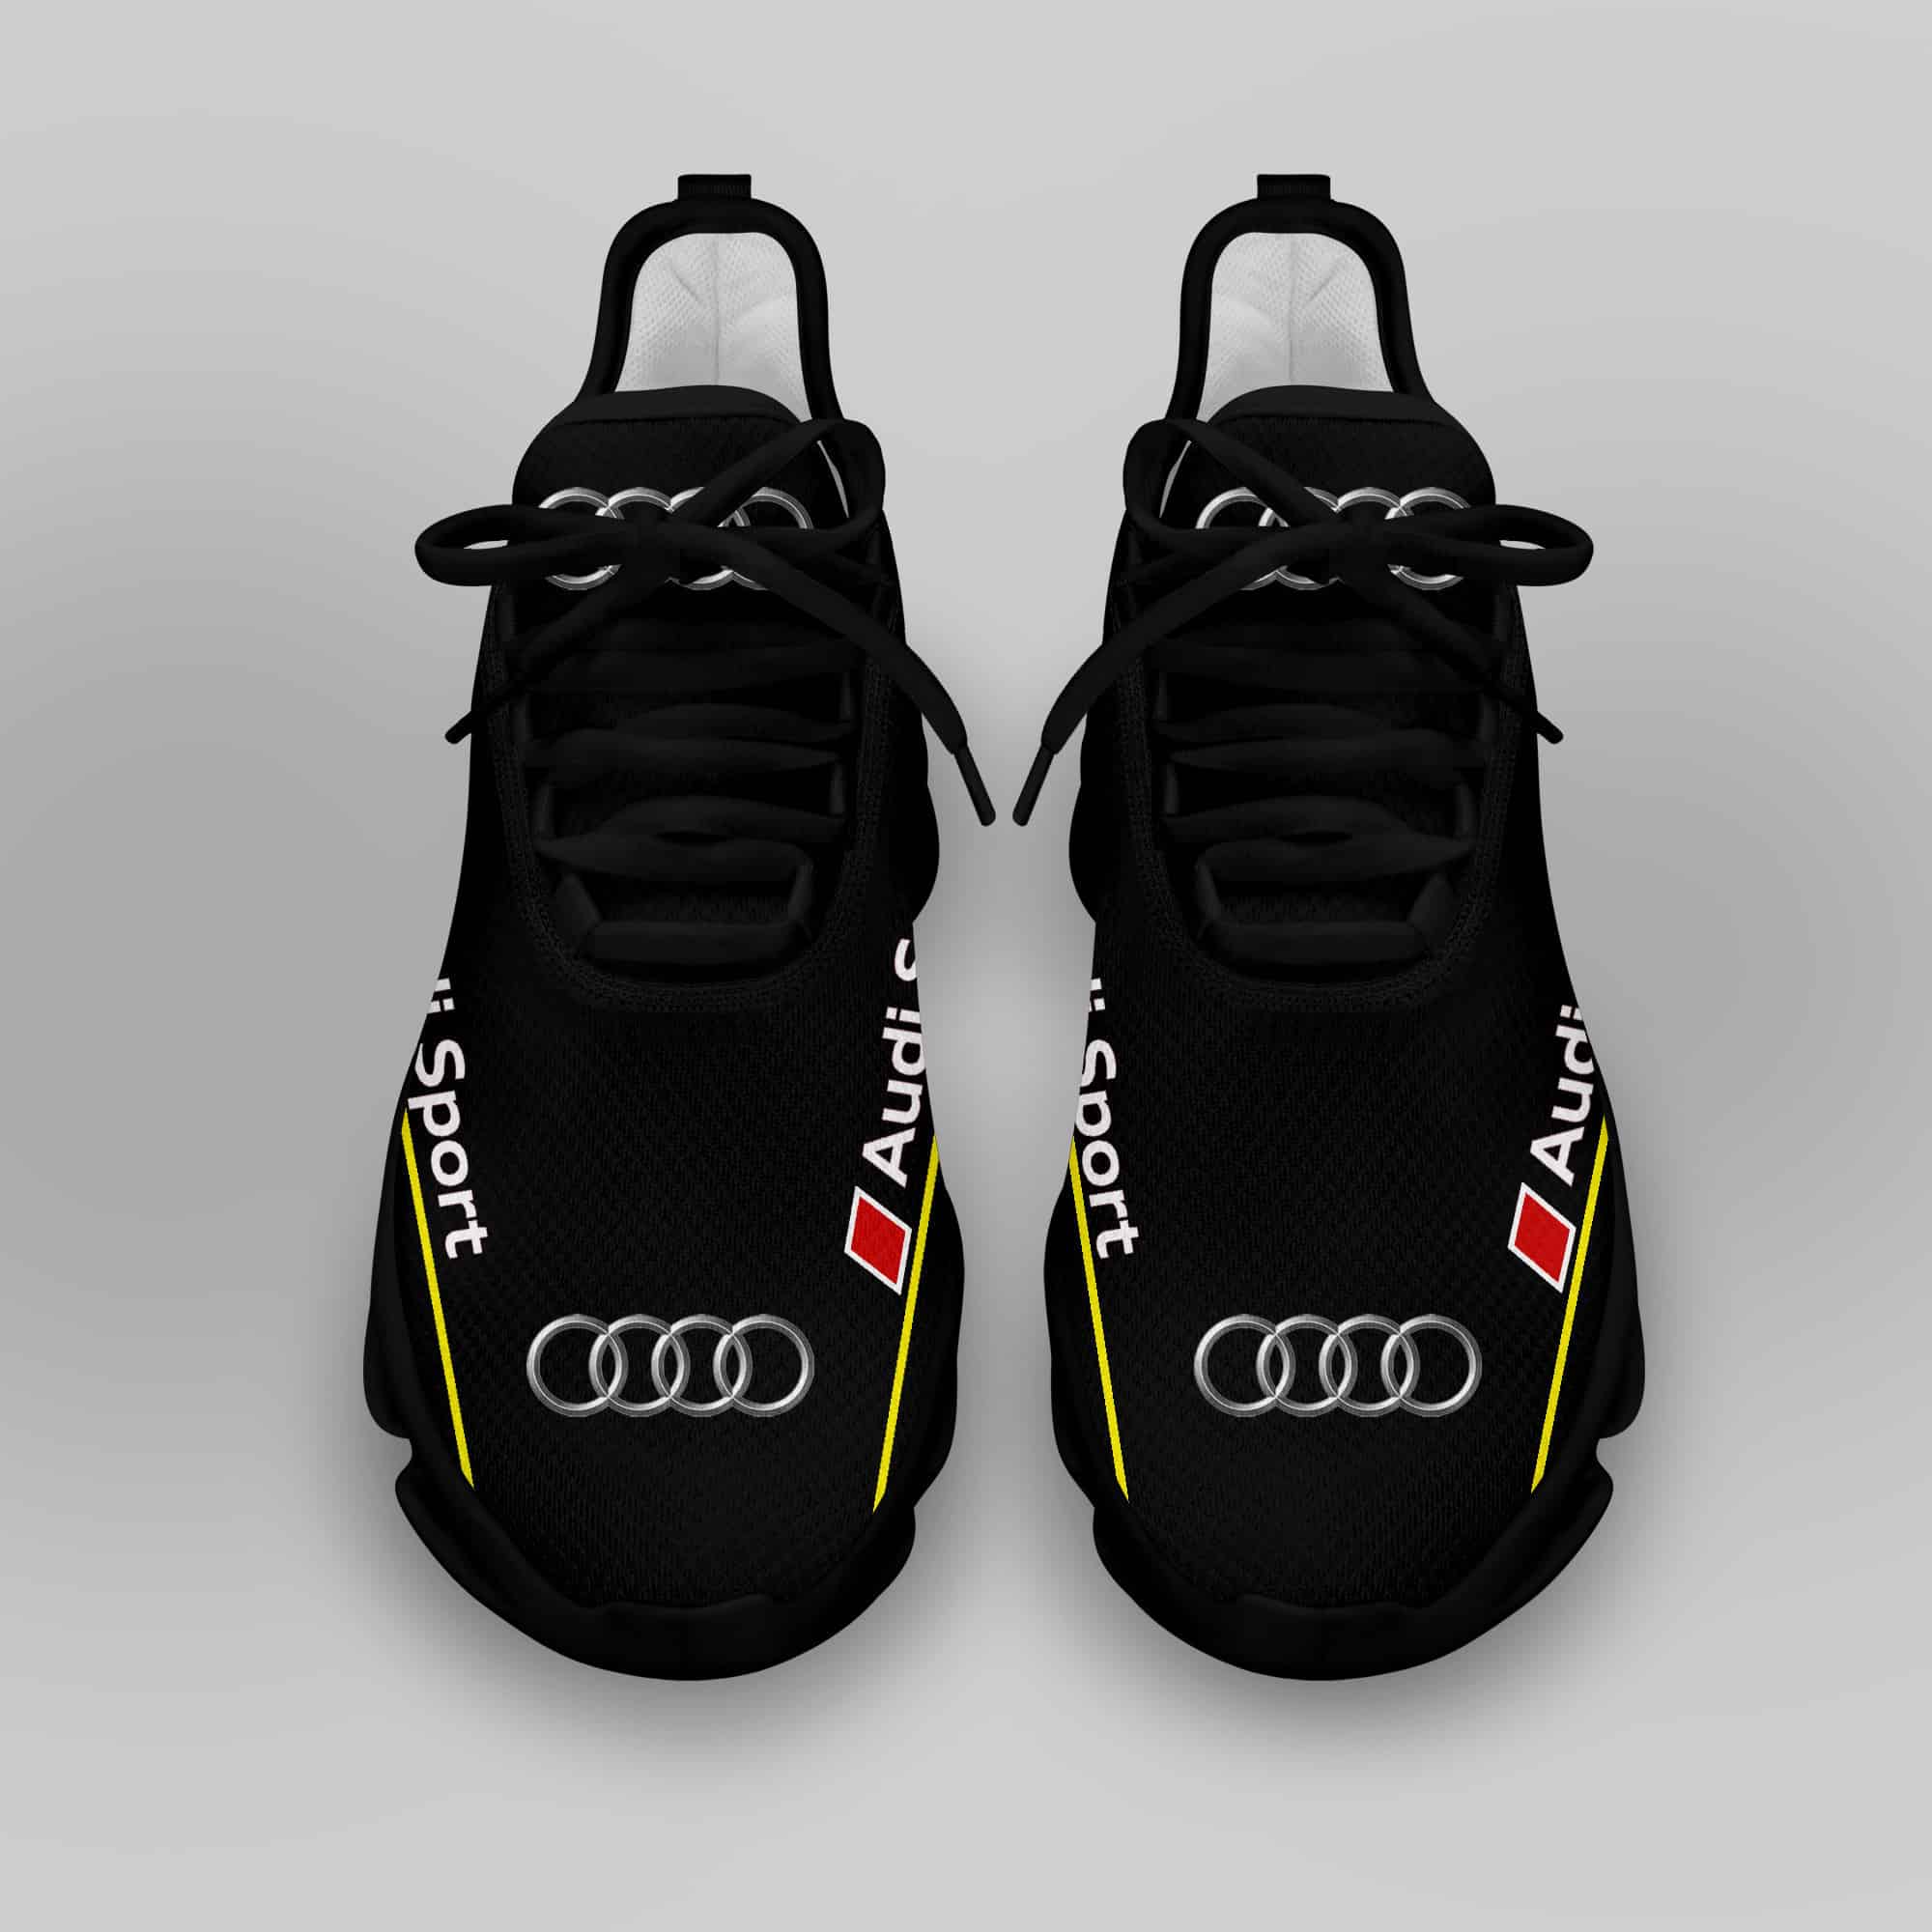 Audi Sport Running Shoes Max Soul Shoes Sneakers Ver 33 4